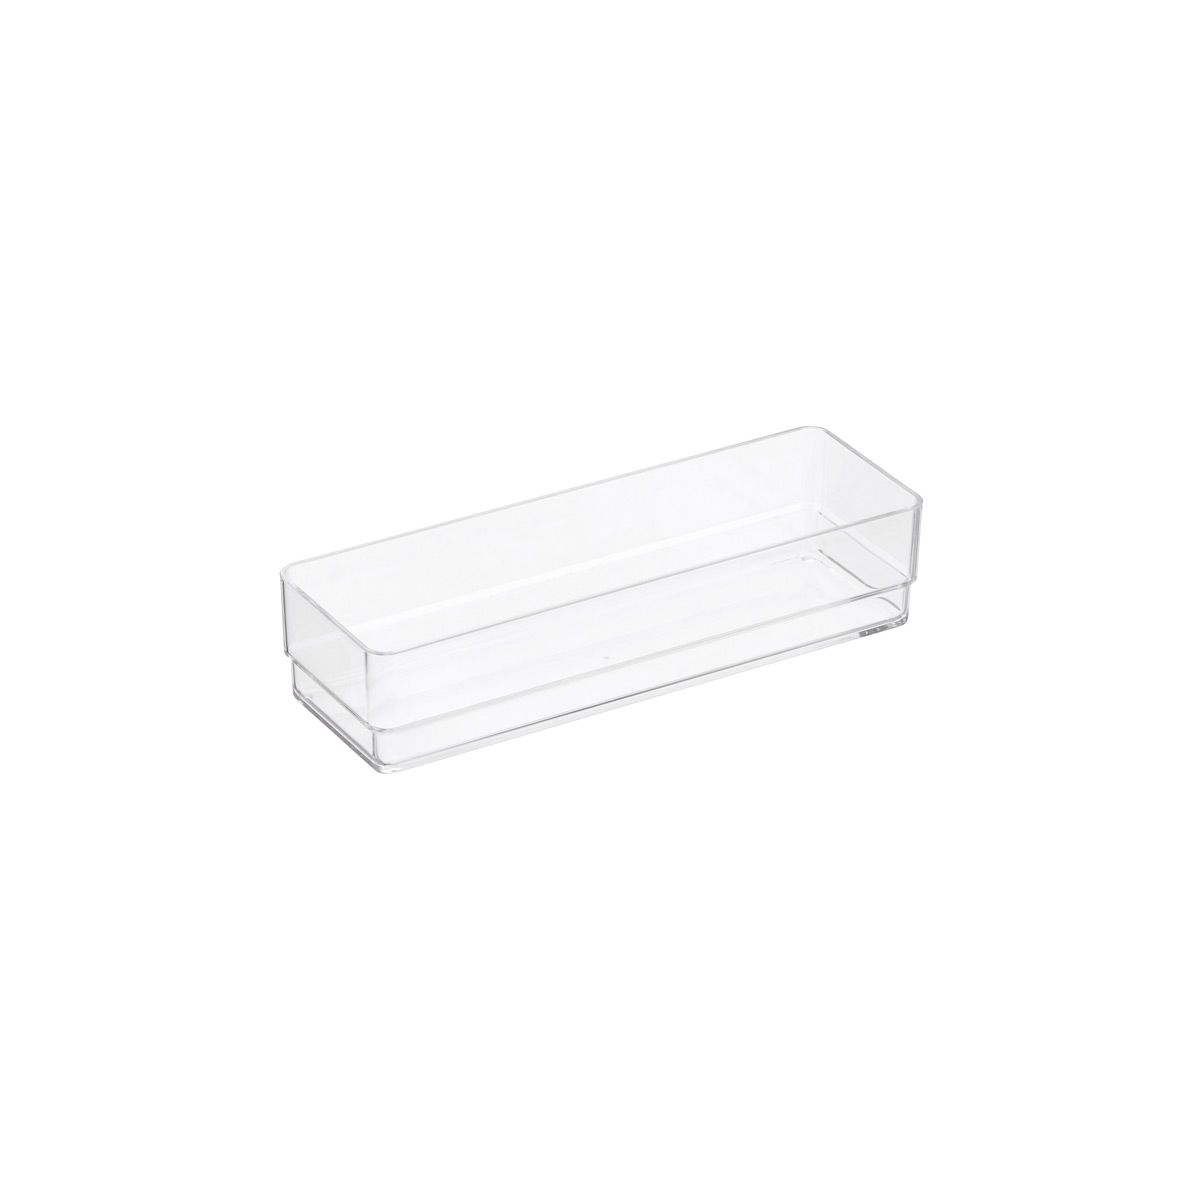 Acrylic Drawer Organizer | The Container Store